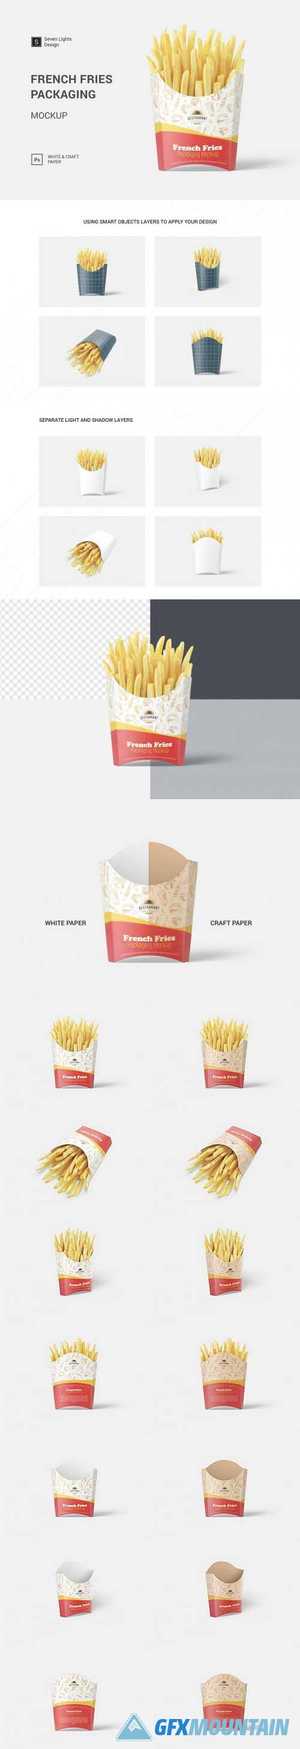 Download French Fries Packaging Mockup 5025126 Free Download Graphics Fonts Vectors Print Templates Gfxmountain Com PSD Mockup Templates